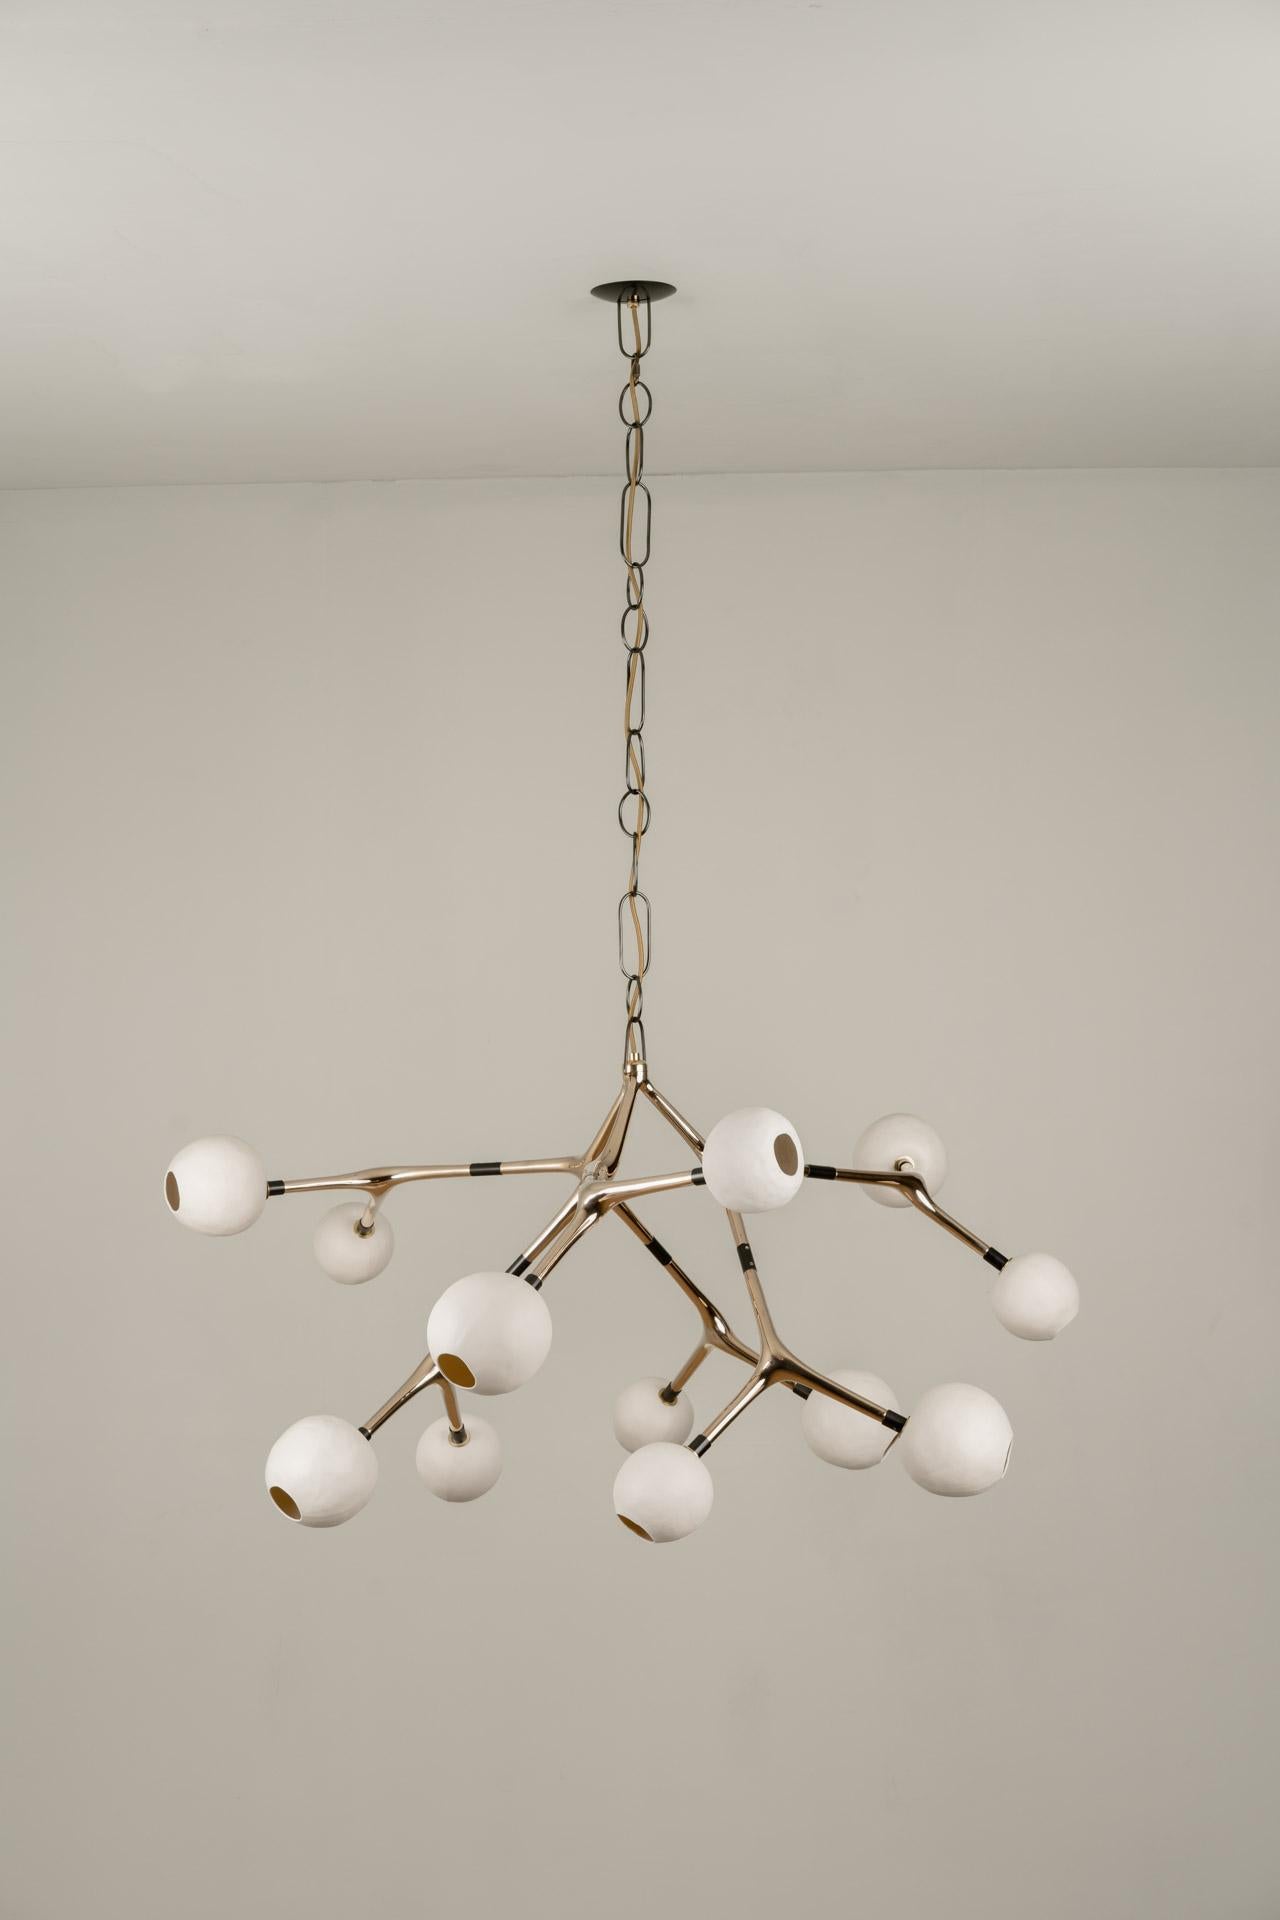 Mexican Organic Modern Chandelier Polished Lost-Wax Brass Porcelain Globes For Sale